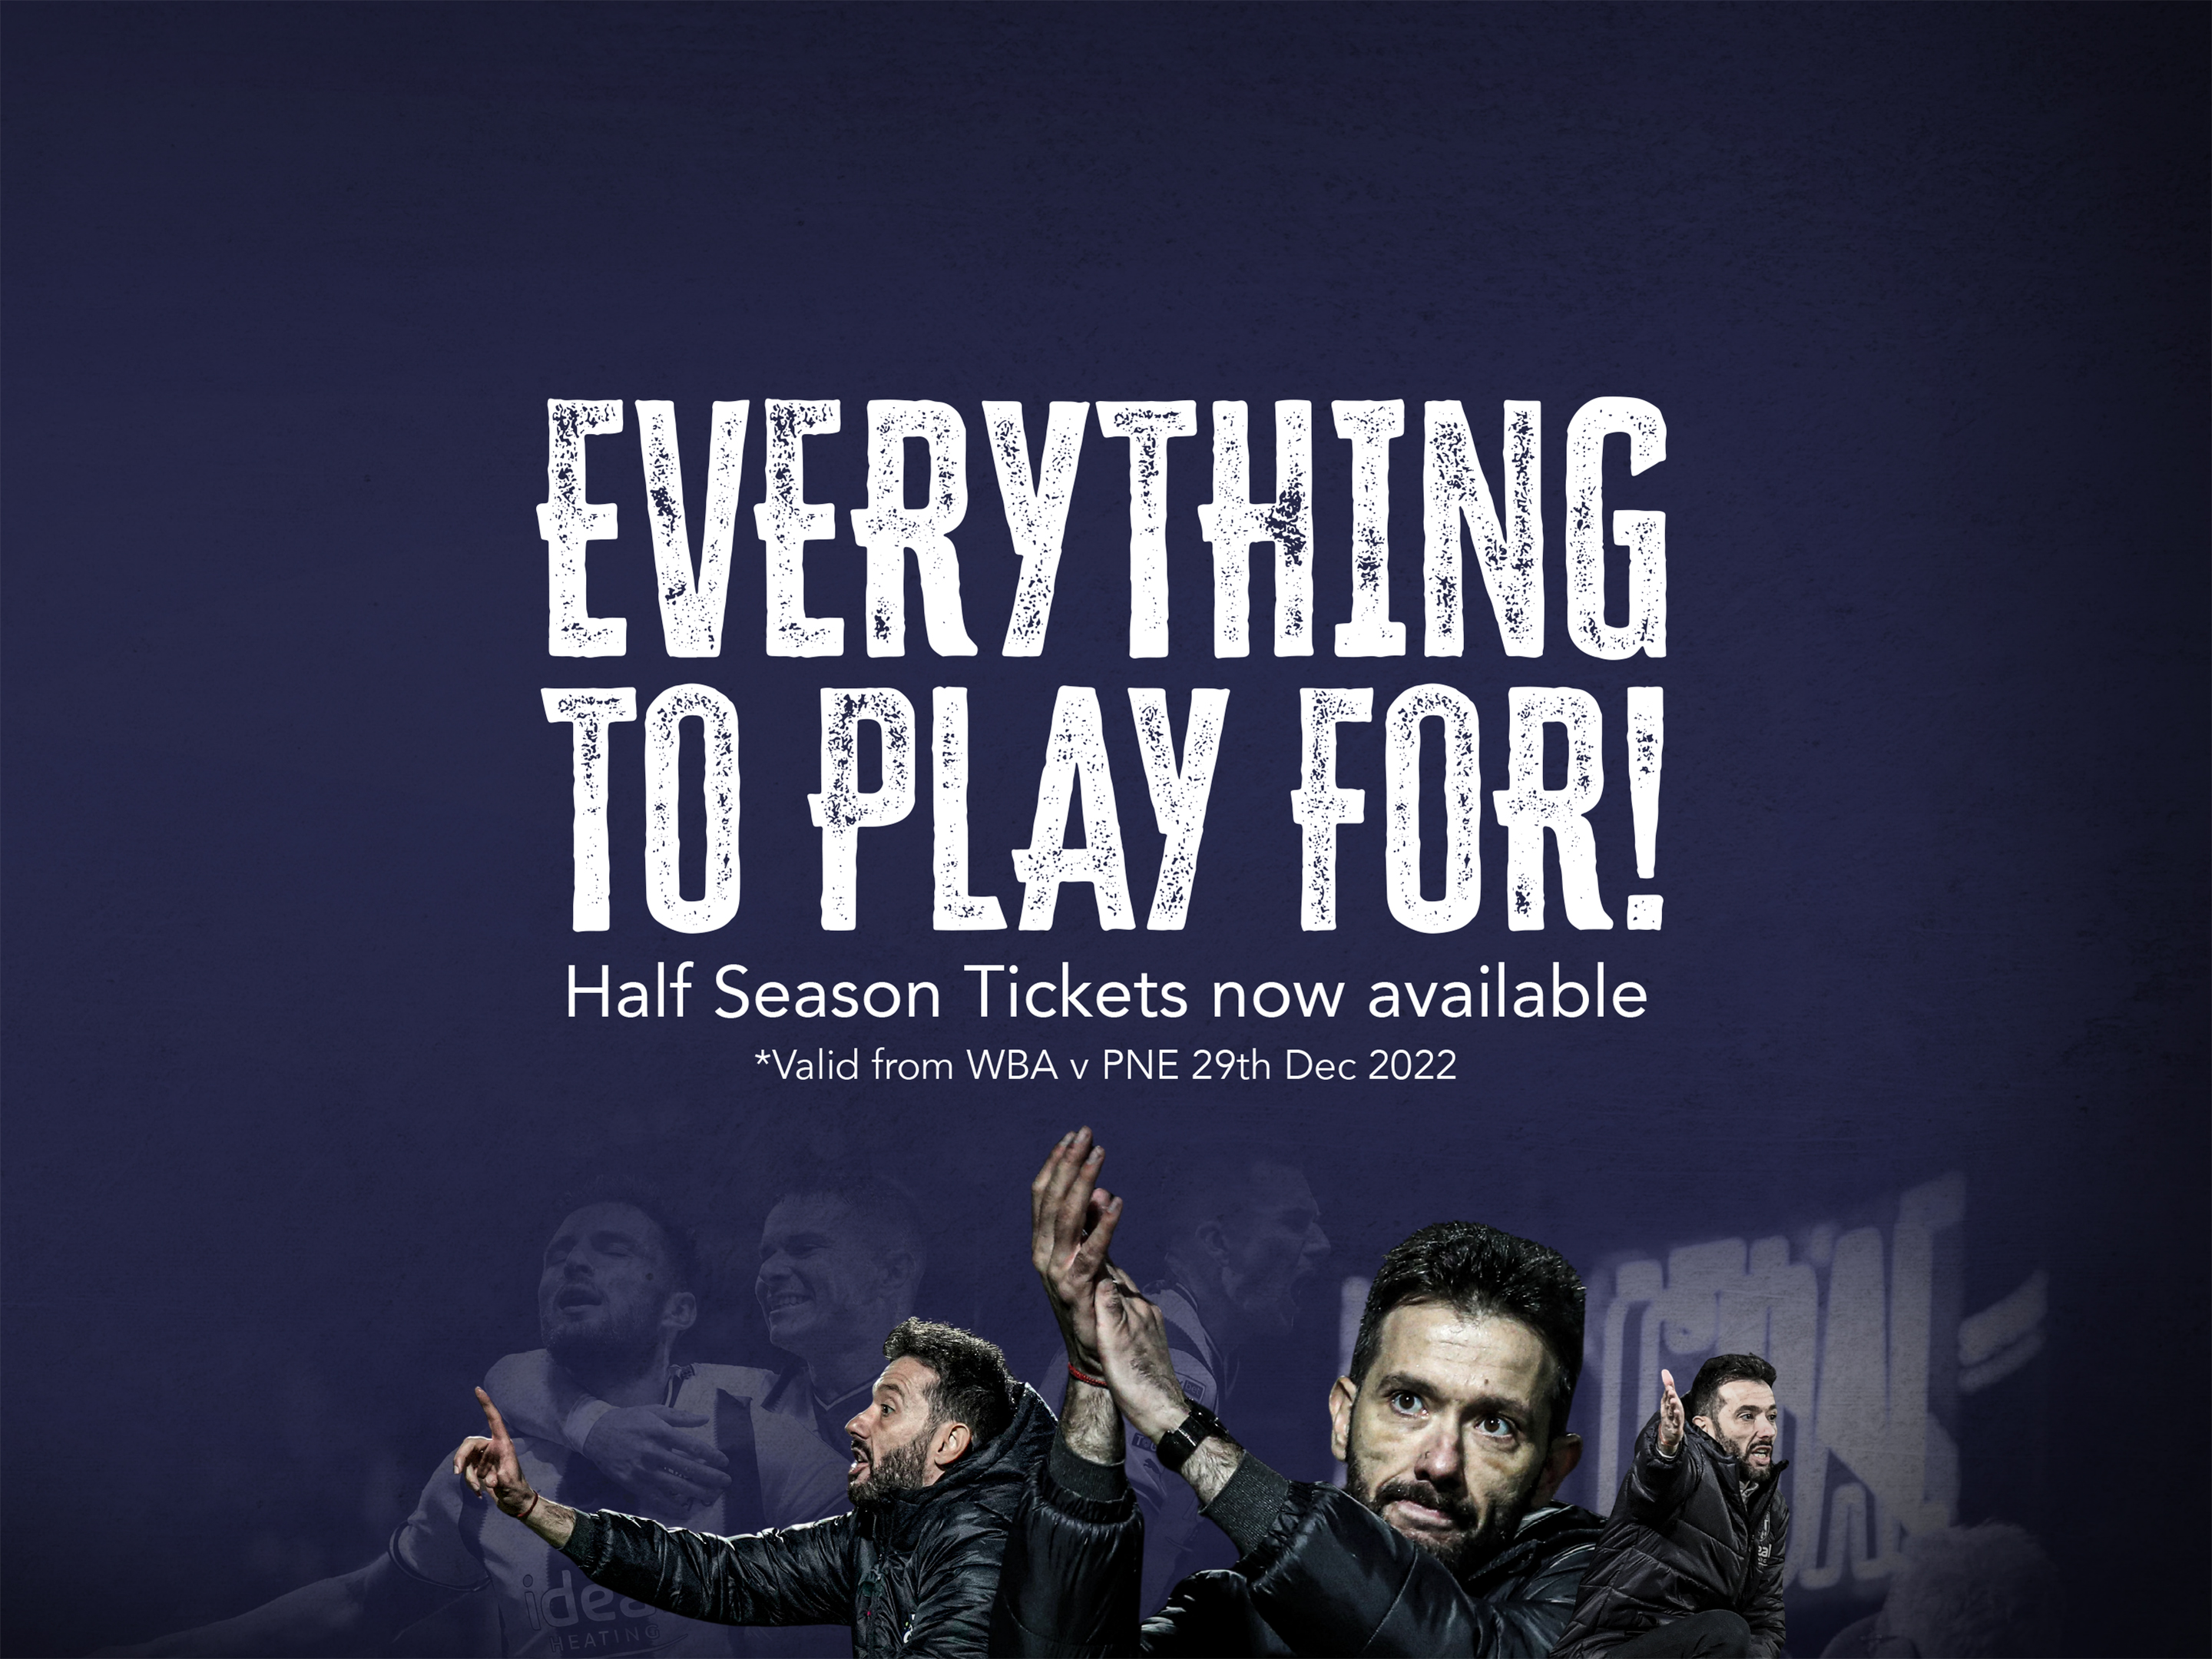 A graphic saying 'everything to play for' while advertising half season tickets